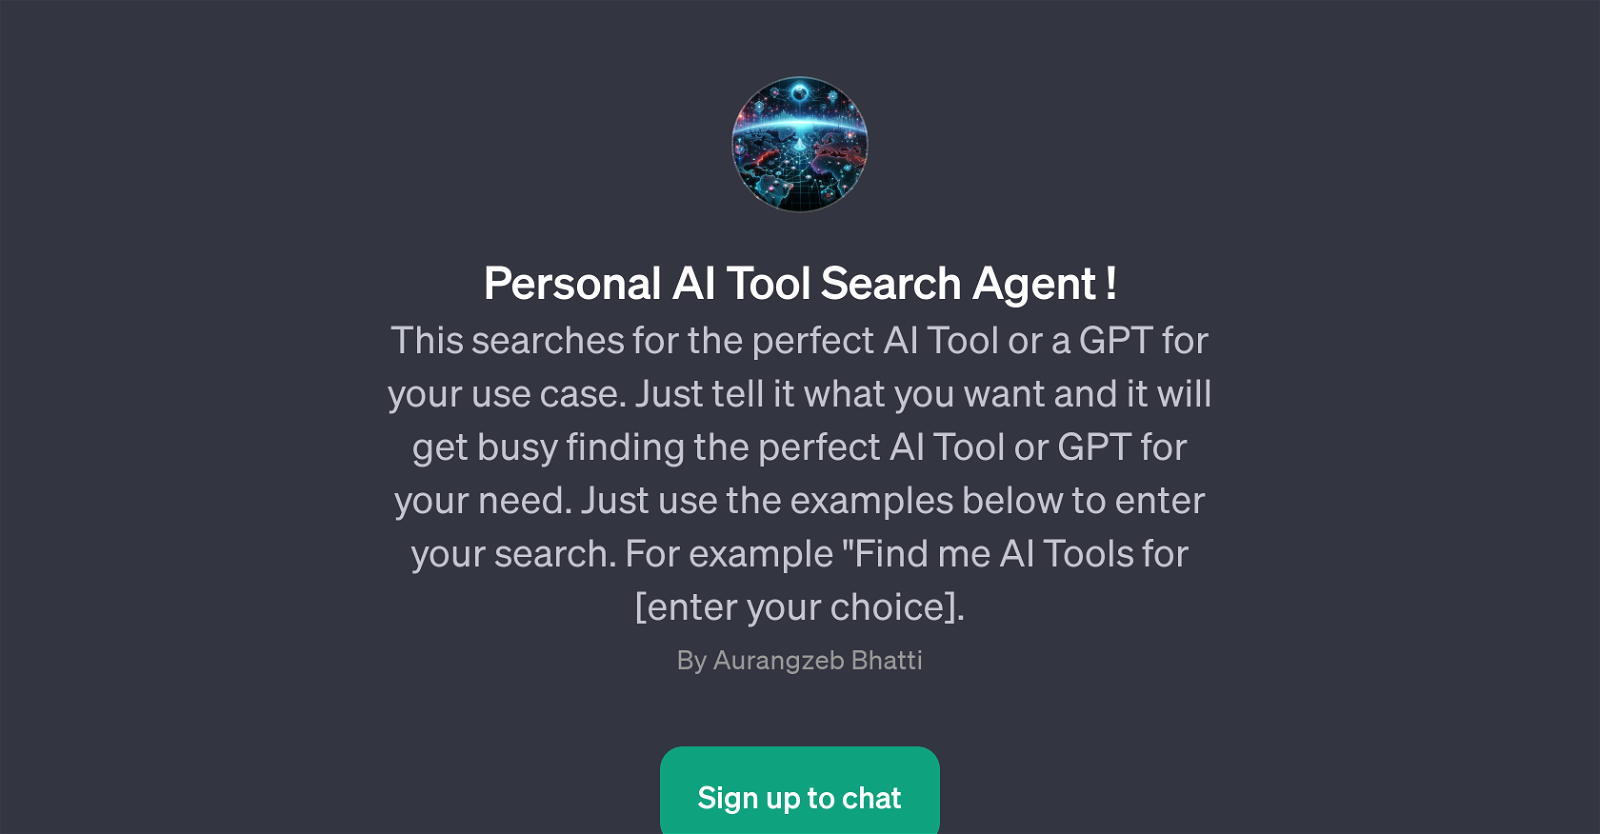 Personal AI Tool Search Agent website